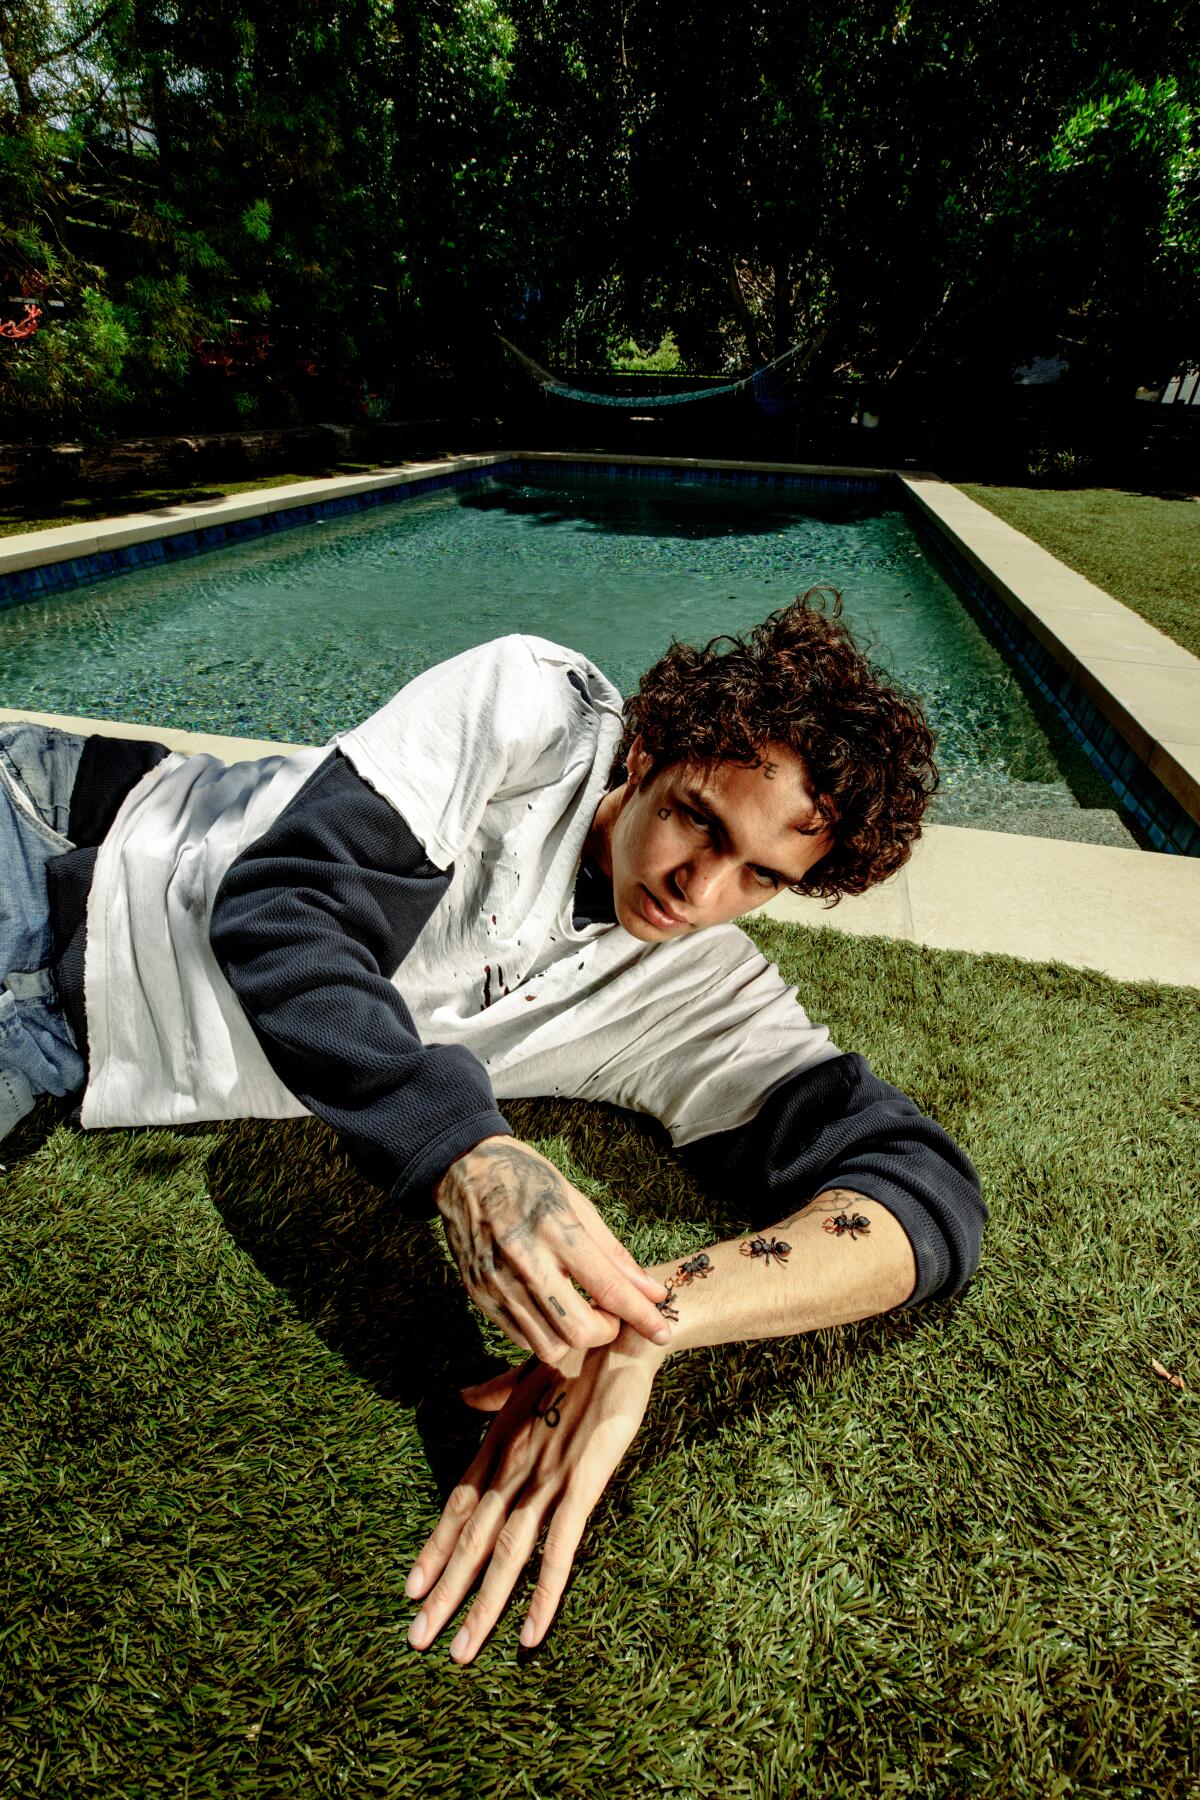 Dominic Fike reclines on the grass next to a rectangular pool